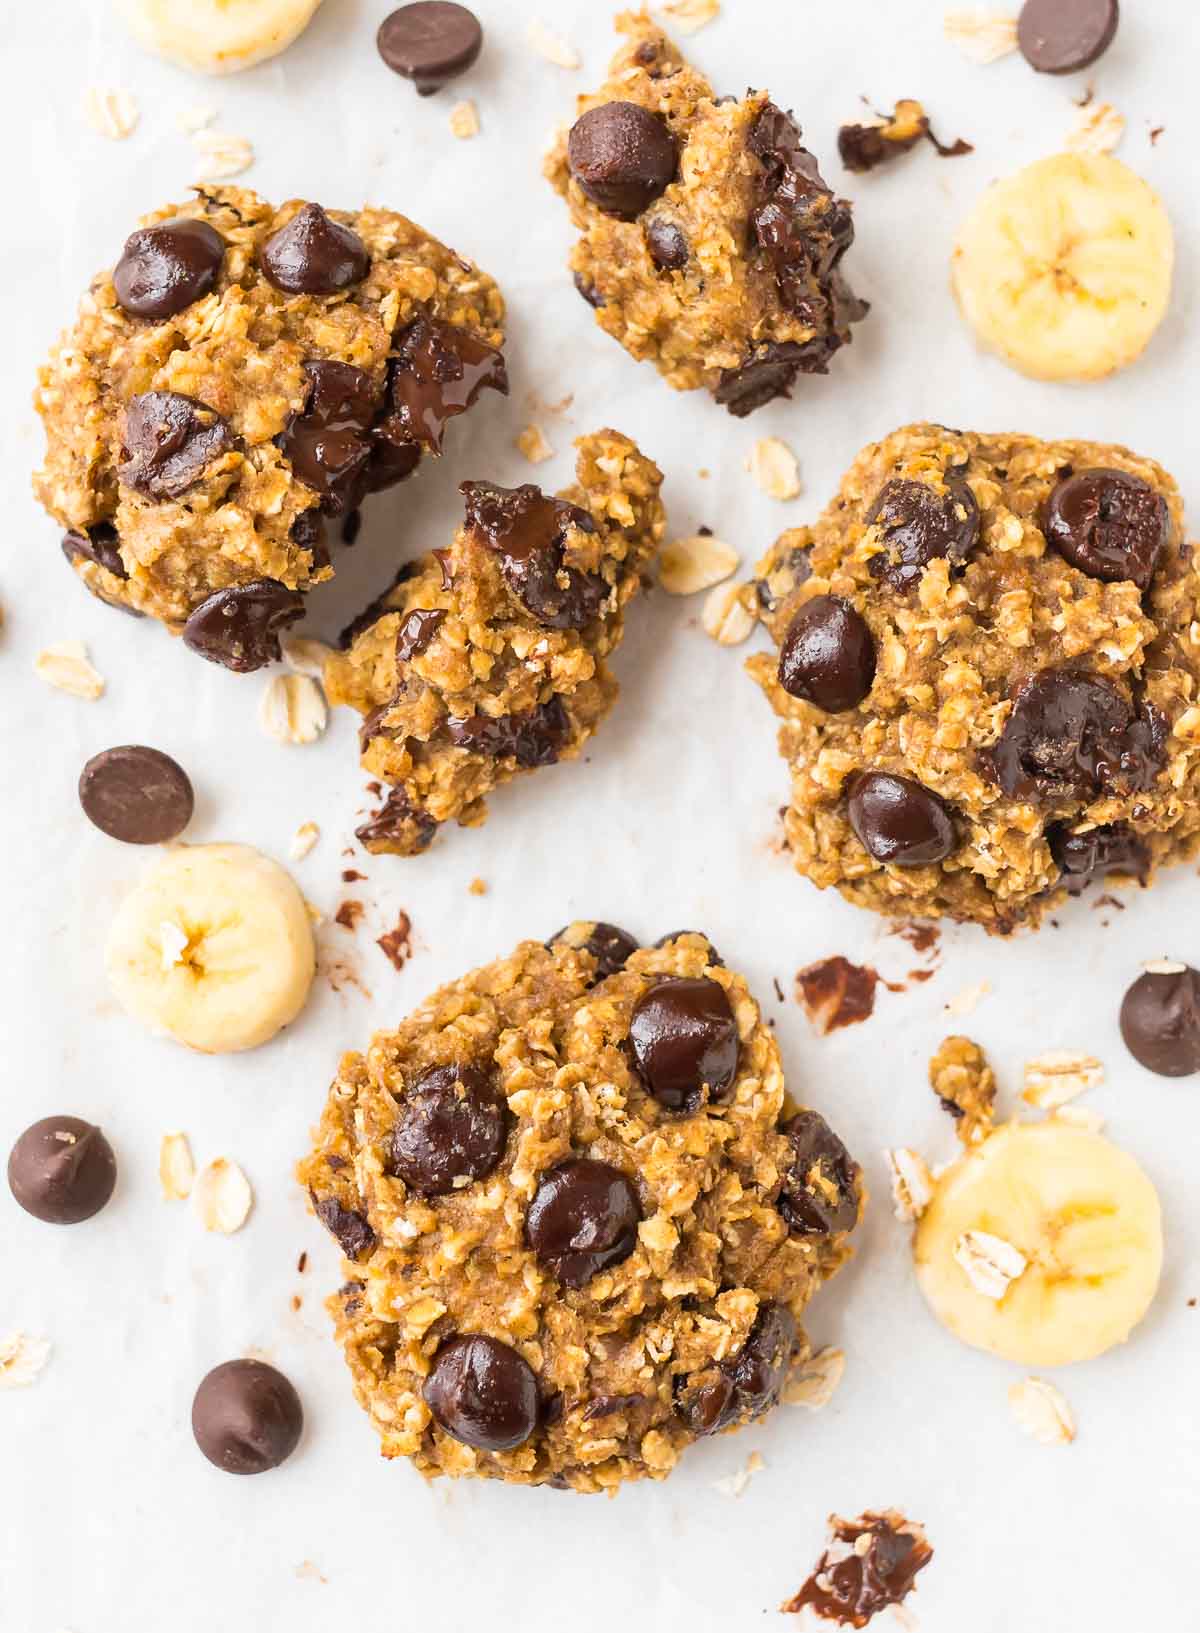 Banana Oatmeal Cookies with Chocolate Chips: A Healthy Dessert Treat